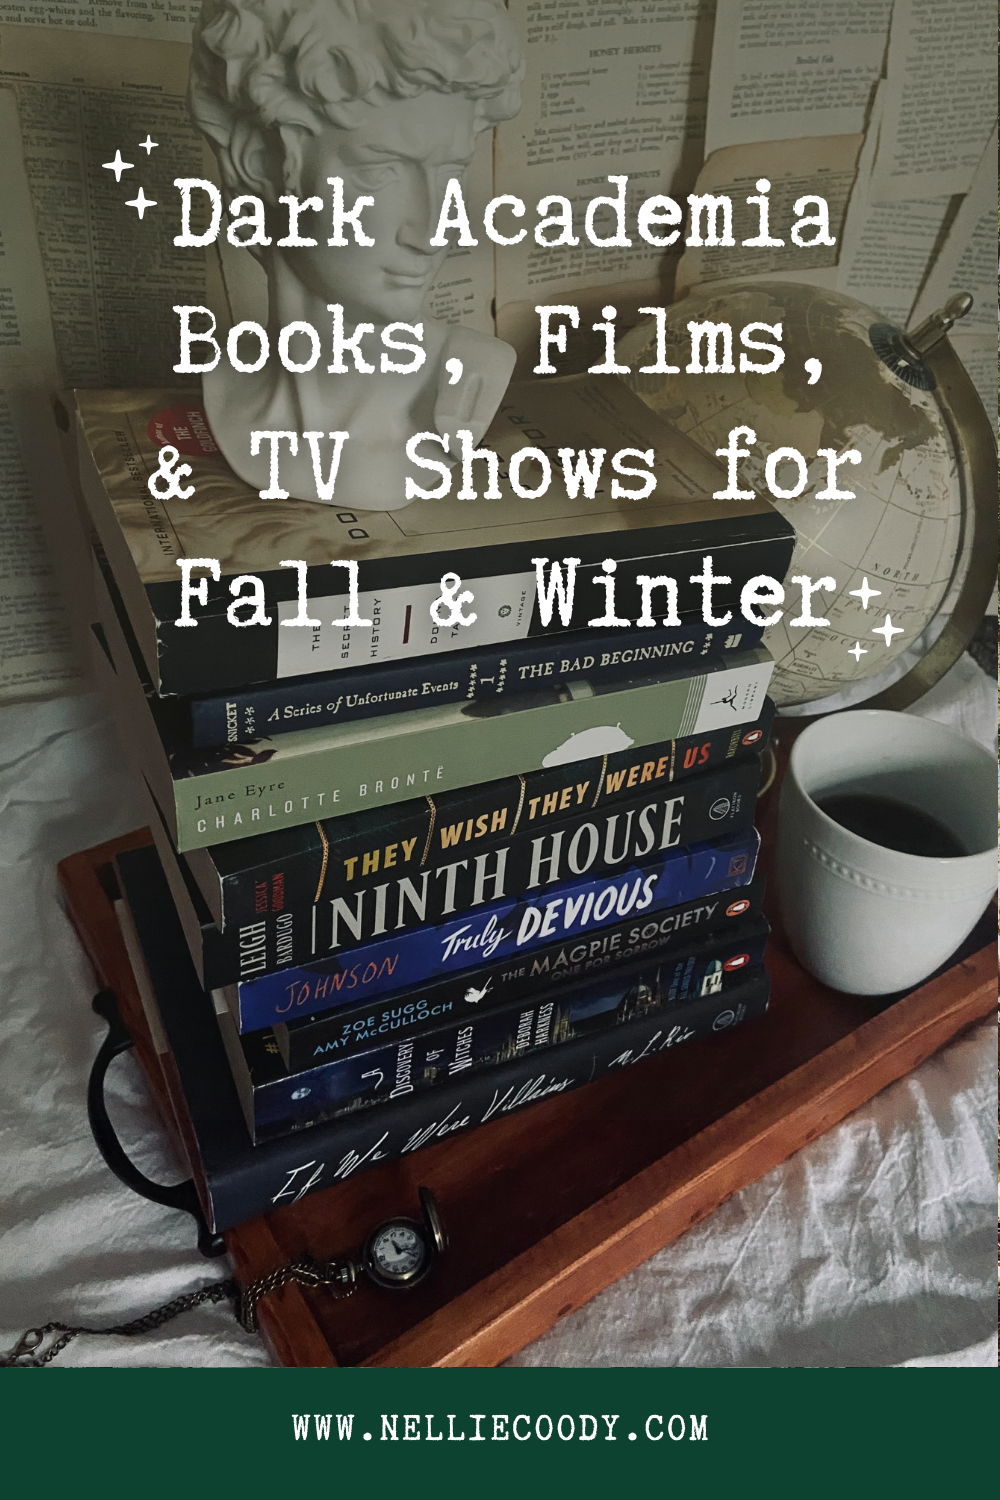 <strong>Dark Academia Books, Films, & Shows for Fall & Winter</strong>